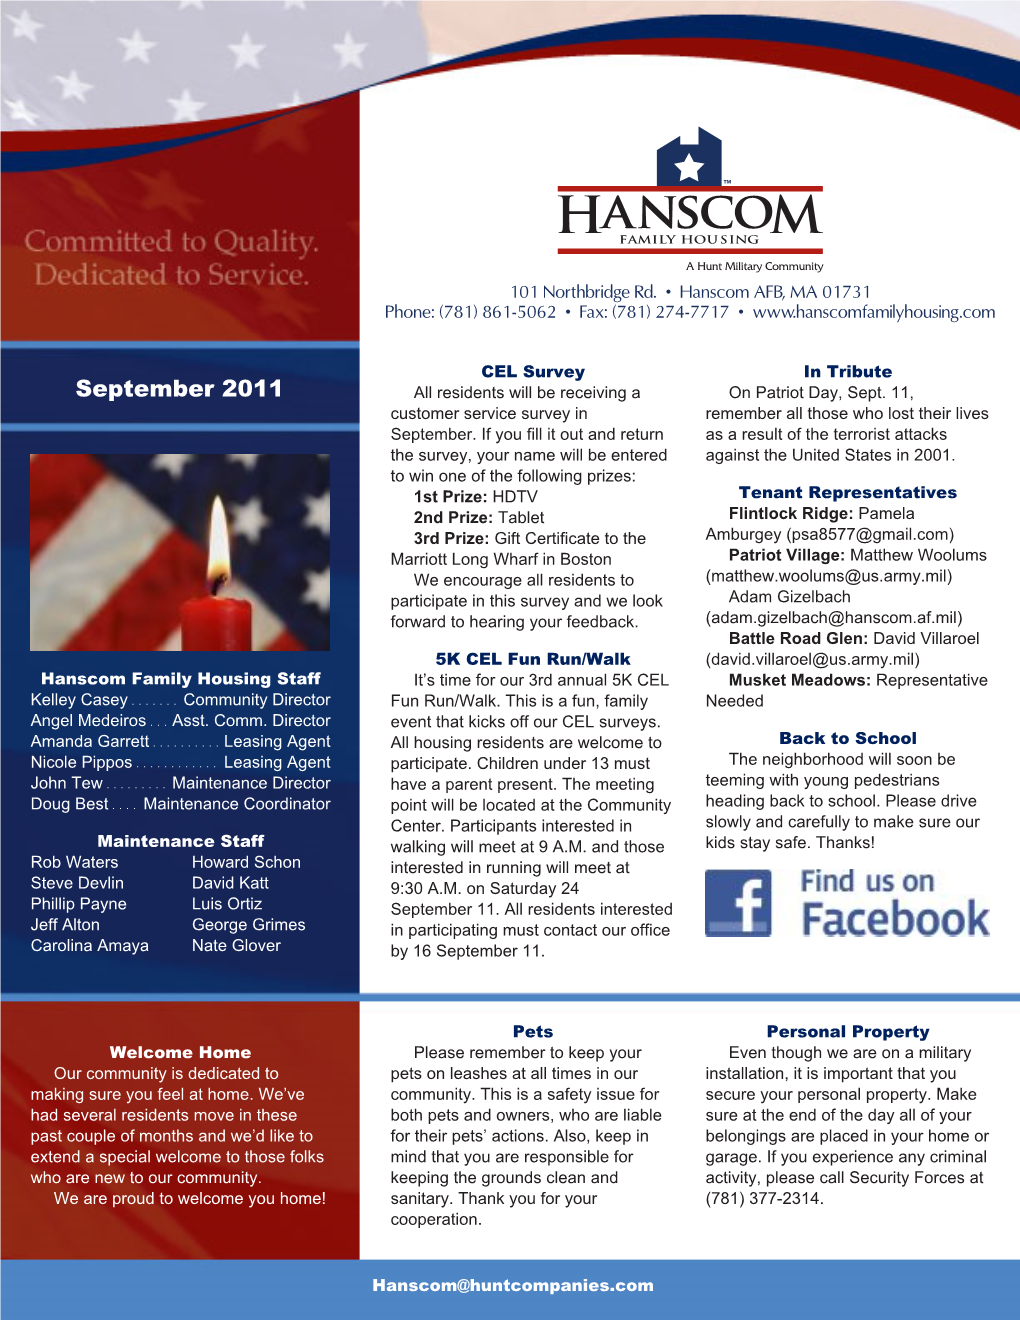 September 2011 All Residents Will Be Receiving a on Patriot Day, Sept